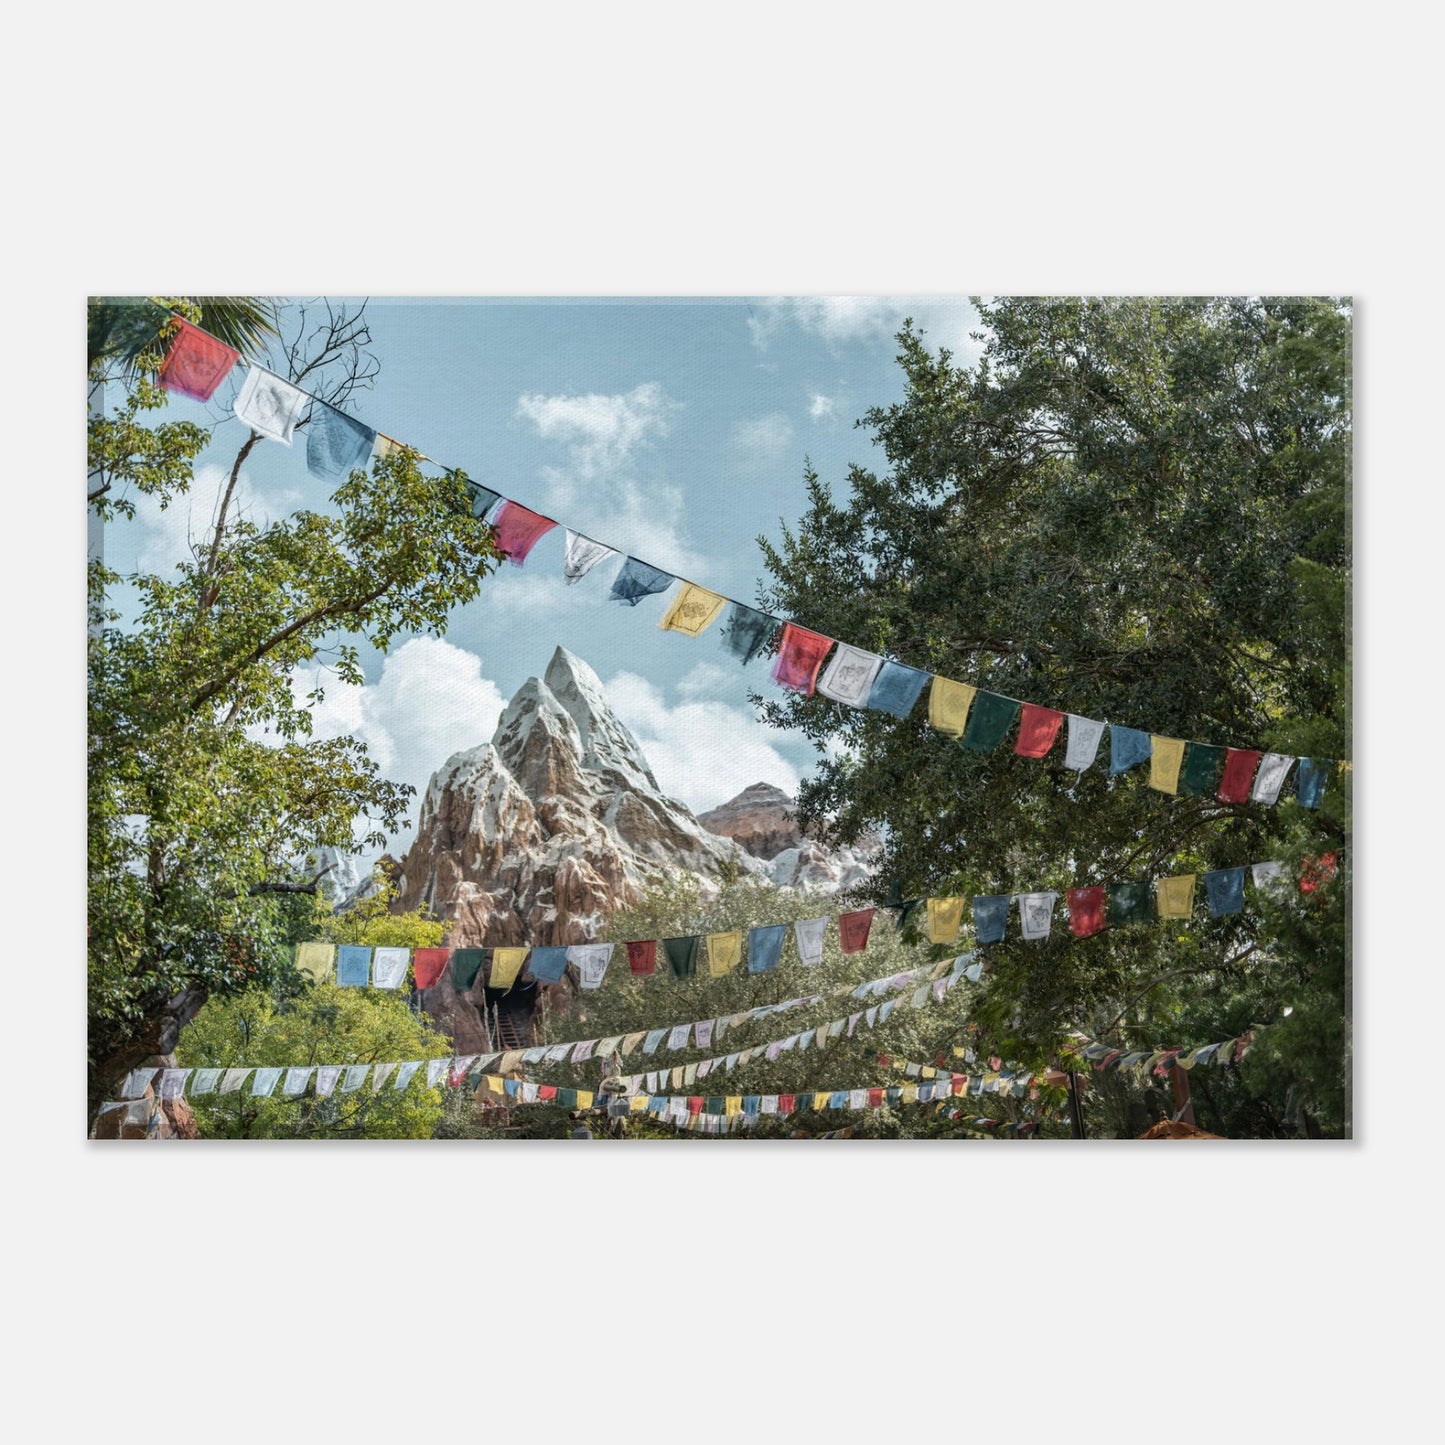 Everest (Gallery-Wrapped Canvas)